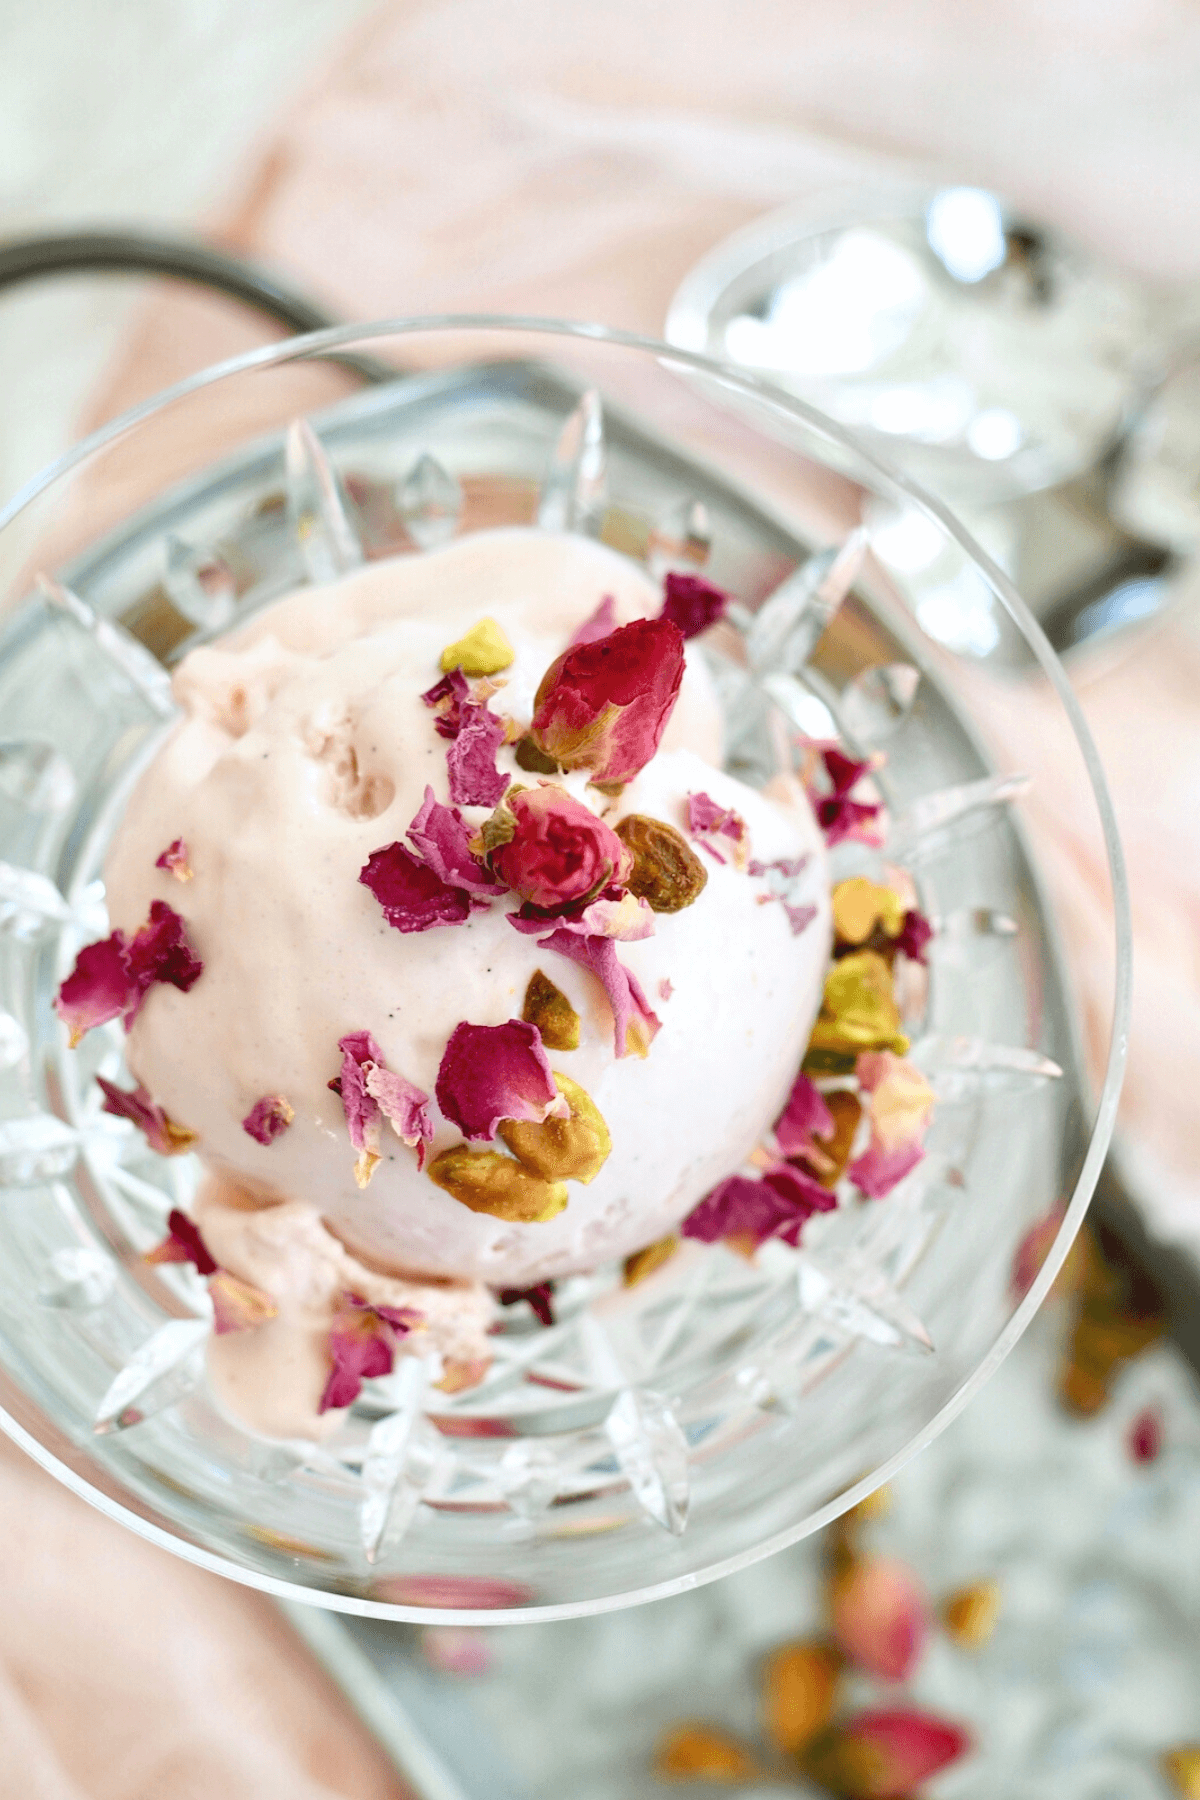 Rose ice cream scooped into cut crystal glass top down shot garnished with pistachios and dried rose petals.